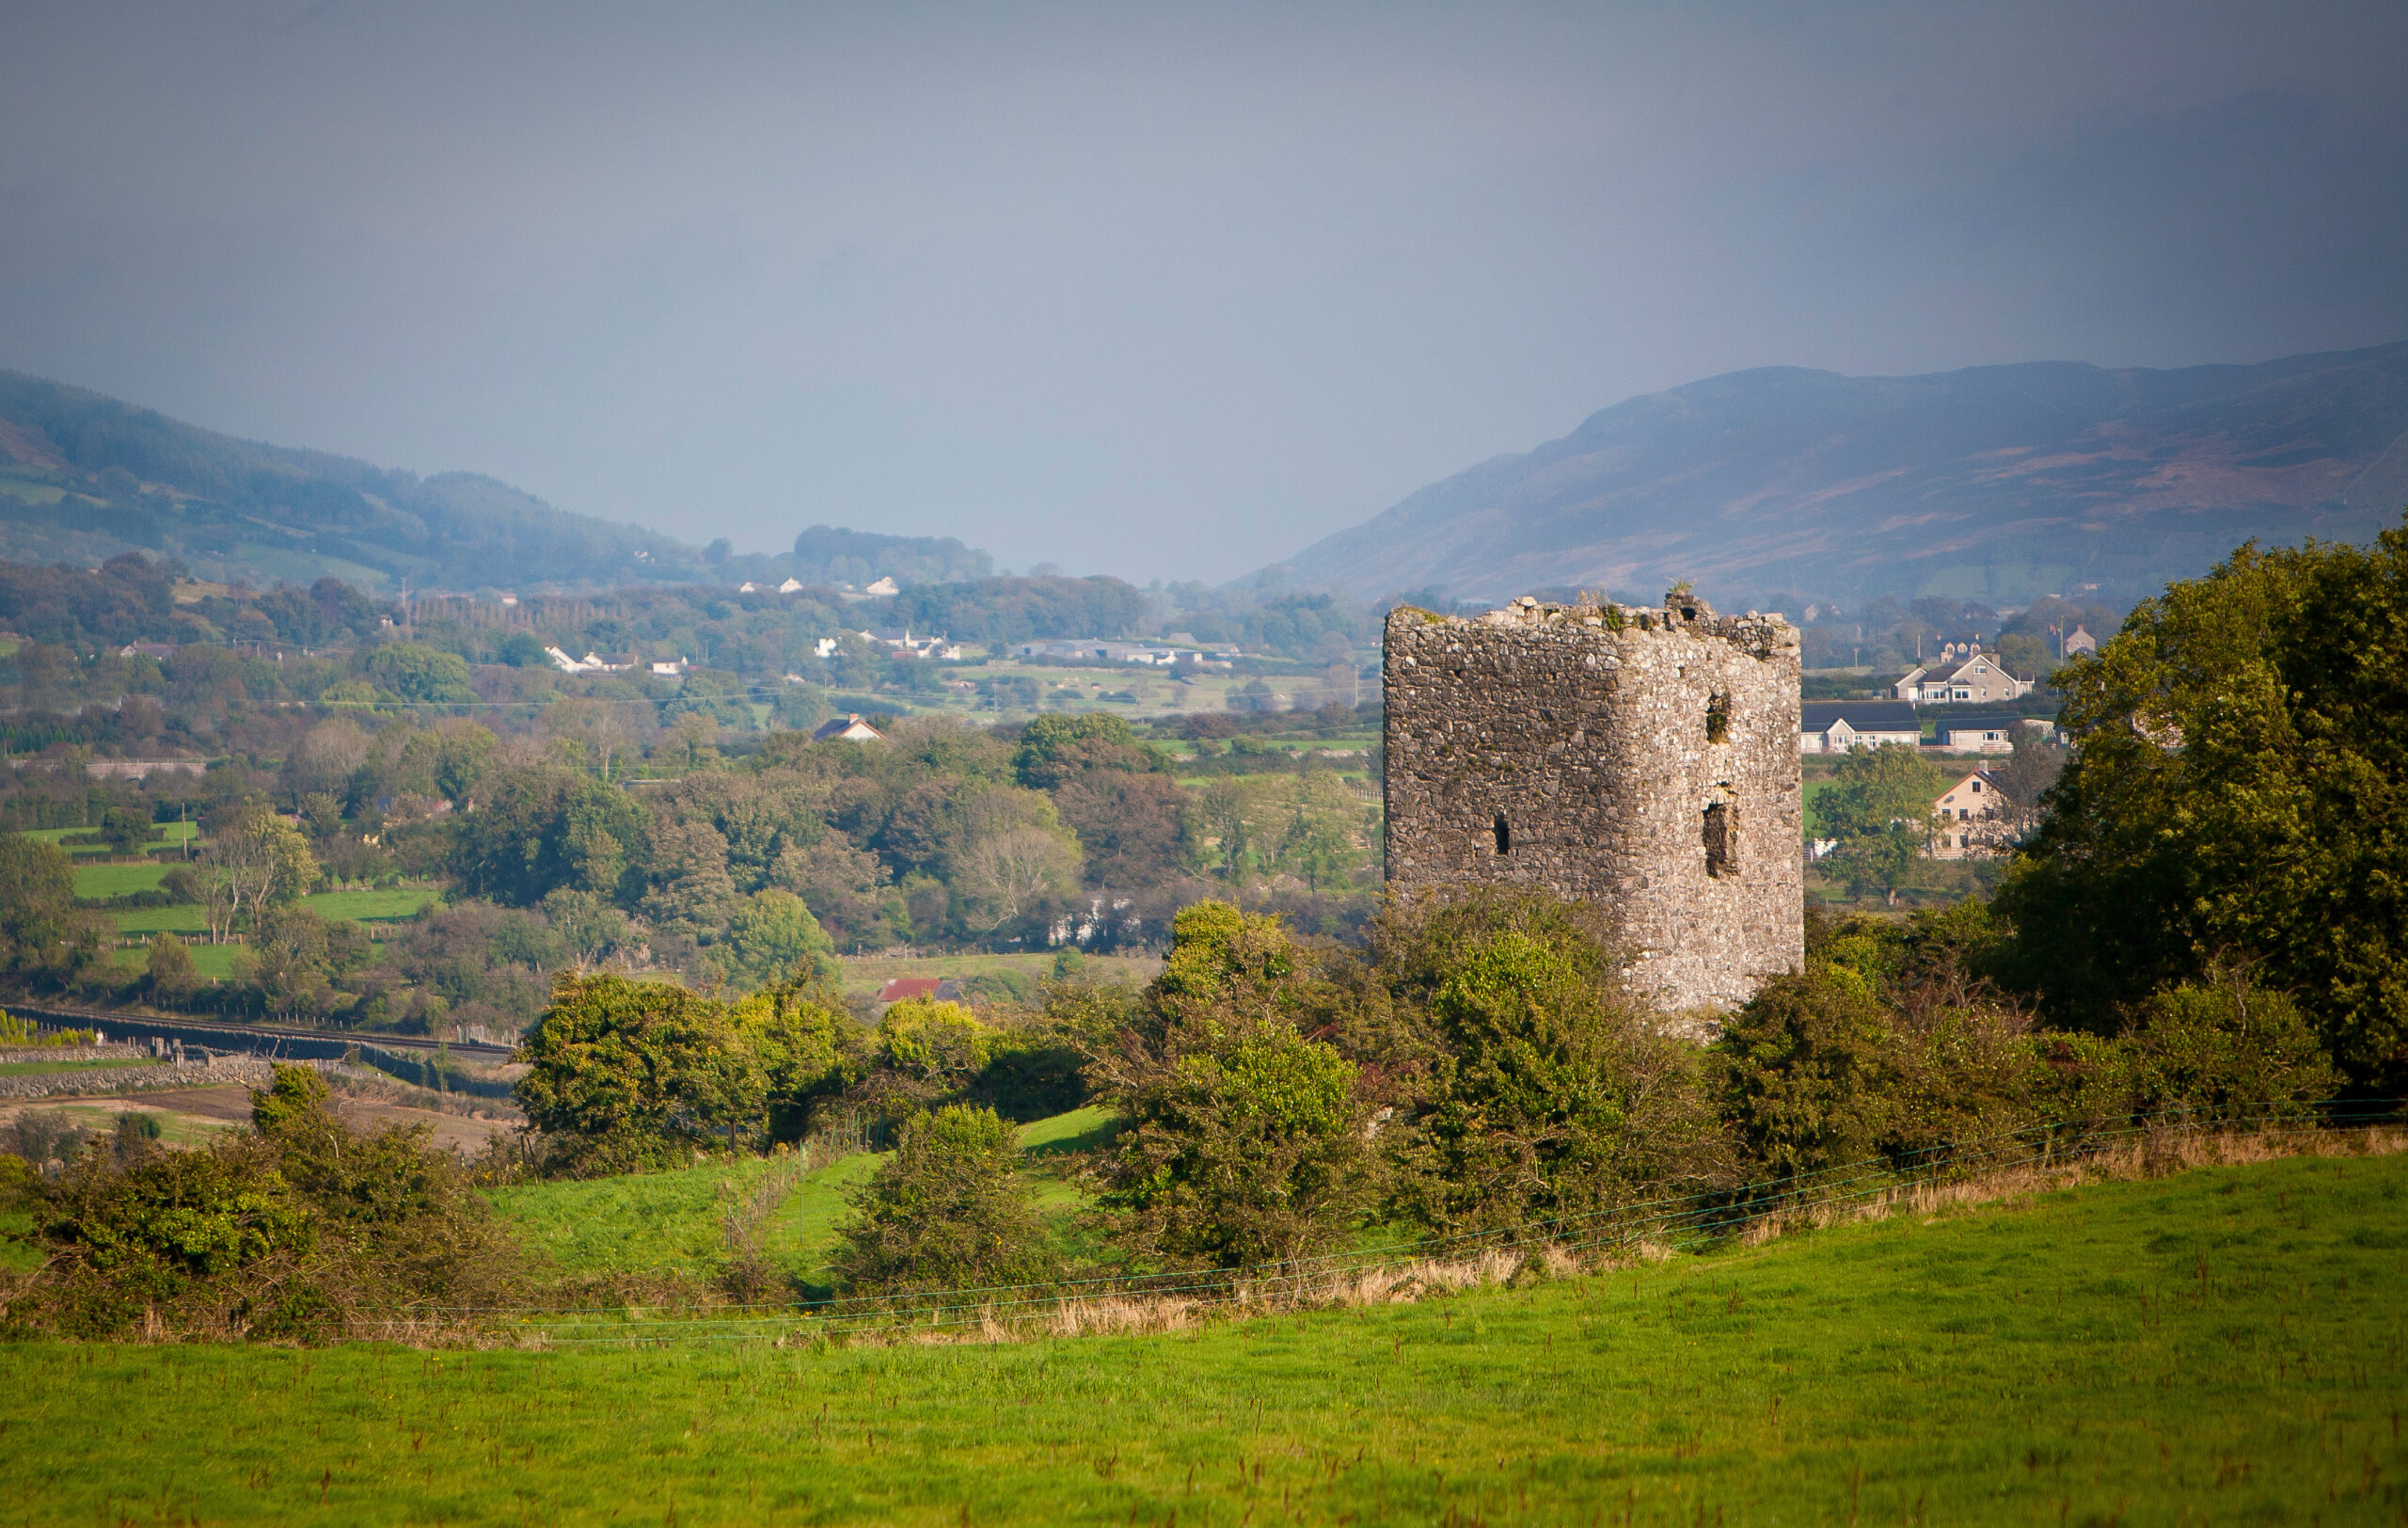 Moira Castle, an old castle situated around the hills of South Armagh